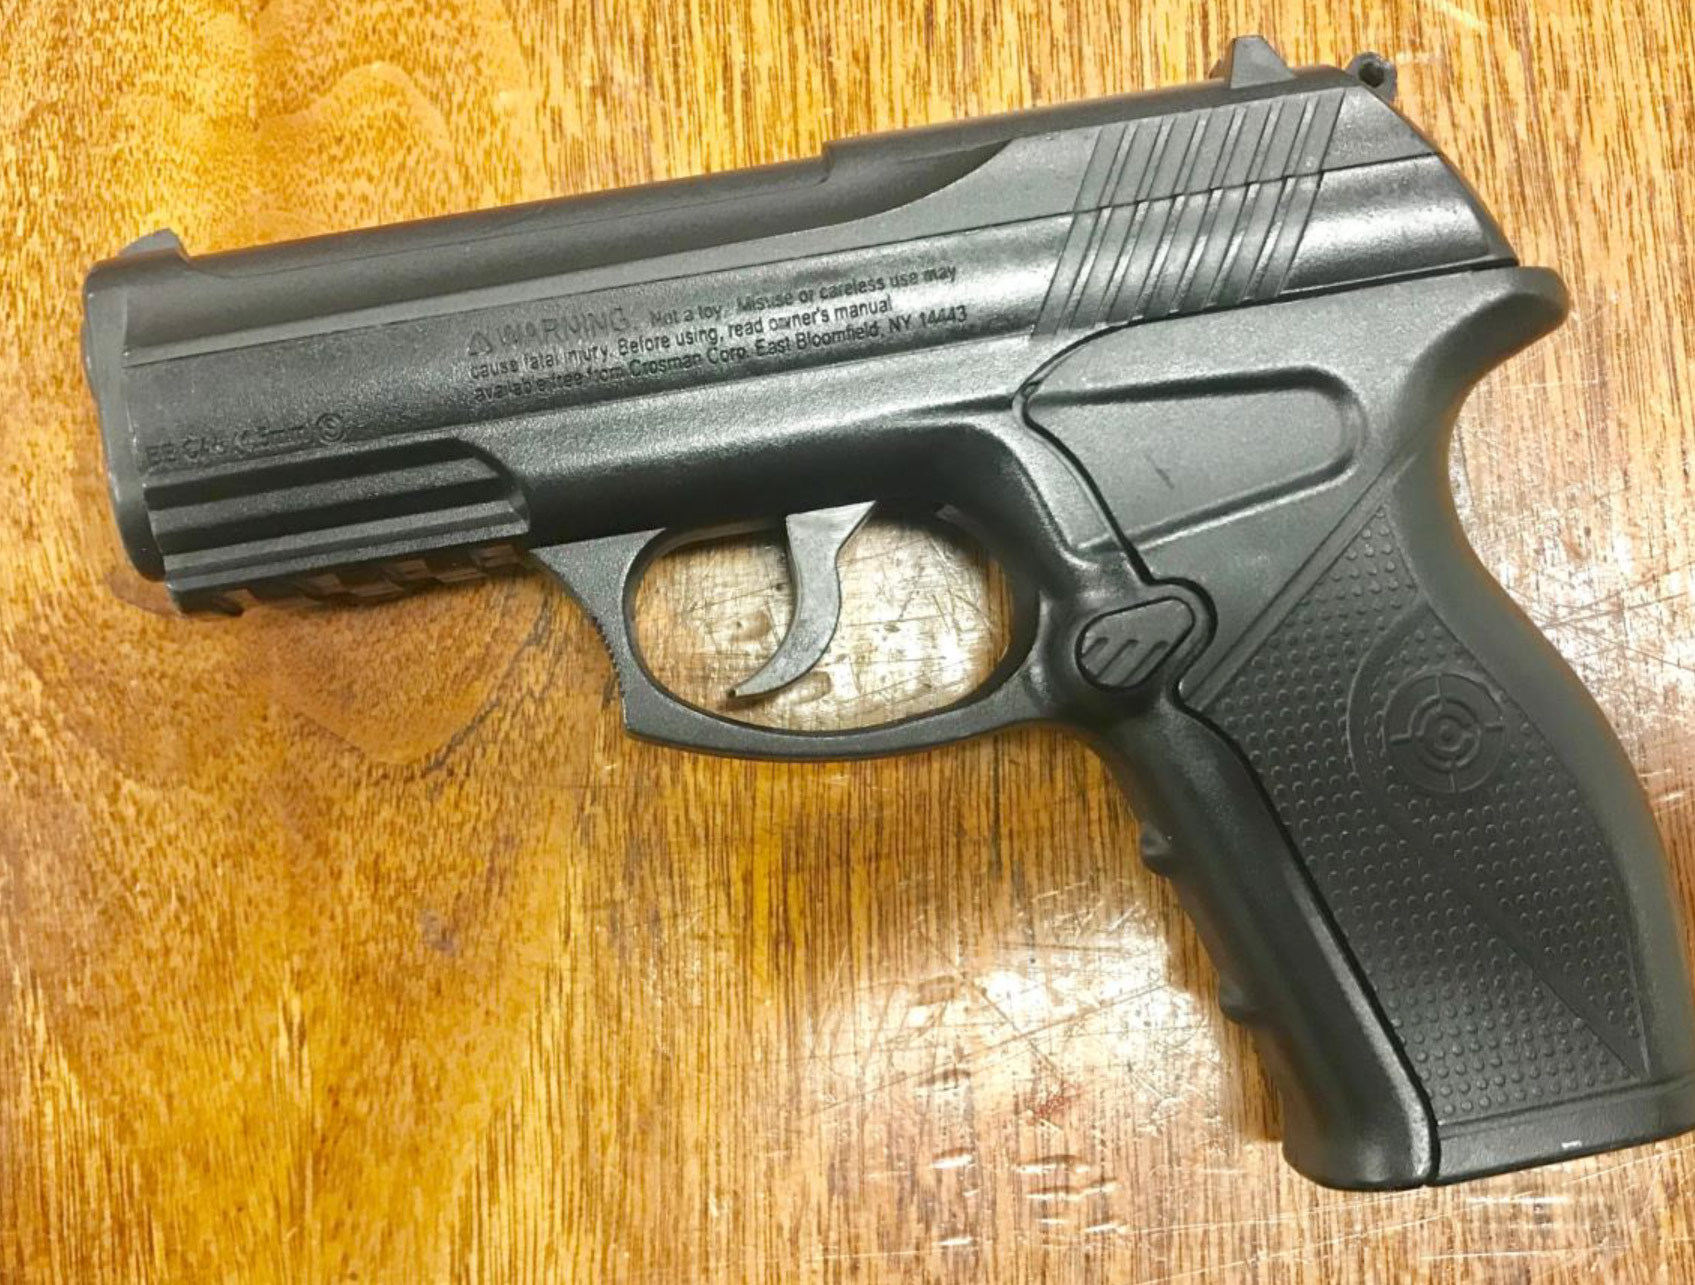 The BB gun allegedly used in Wednesday's incident at the periphery of Bunnell Elementary School, in an image provided Friday afternoon by the Bunnell Police Department. Click on the image for larger view.